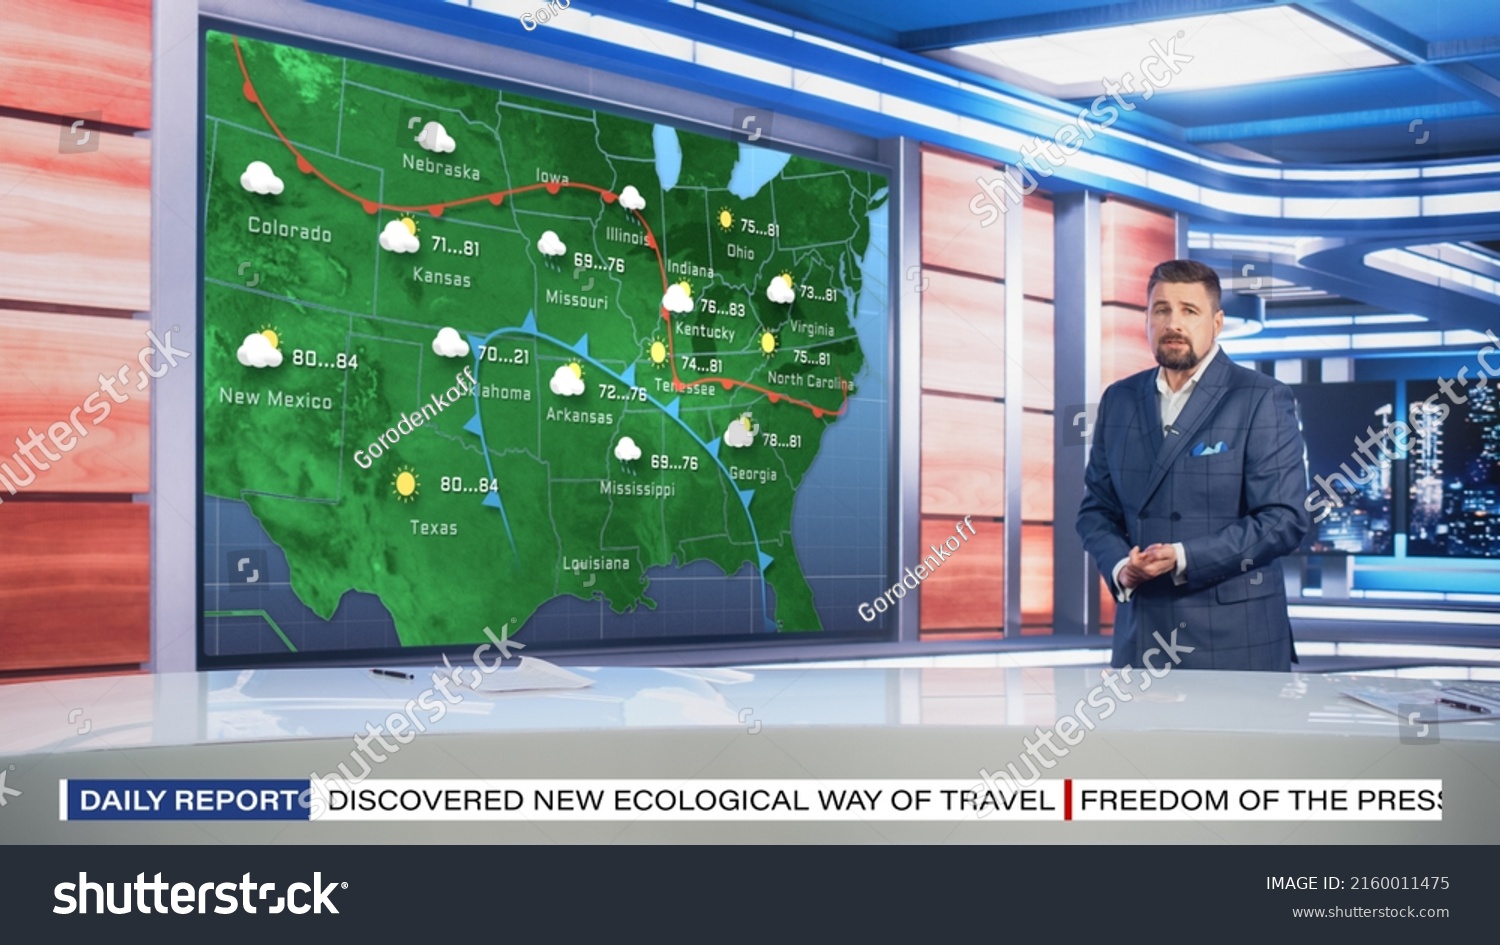 TV Weather Forecast Program: Professional Television Host Reviewing Weather Report in Newsroom Studio, Uses Big Screen with Visuals. Famous Anchorman Talks. Mock-up Cable Channel Concept. #2160011475